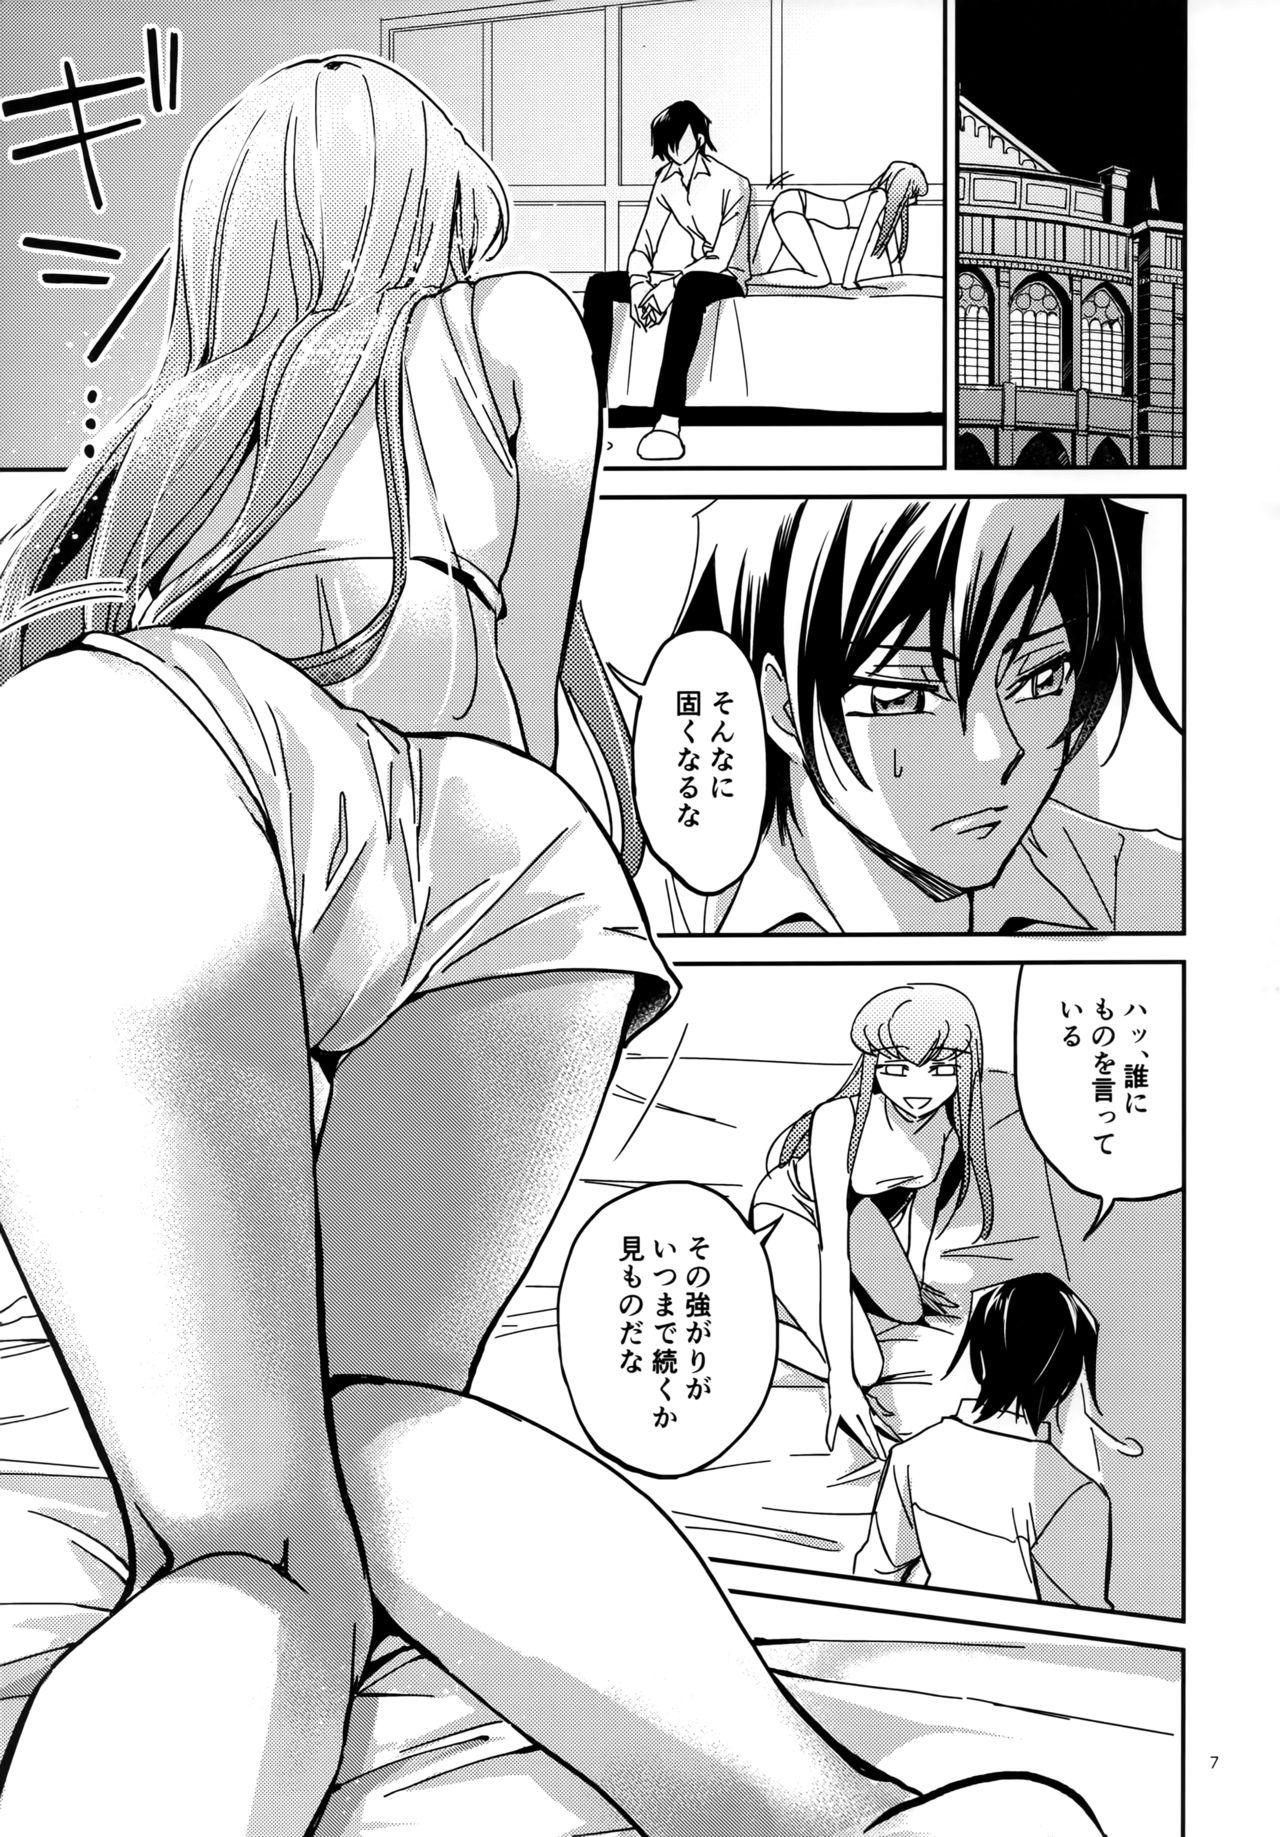 Amature Porn Place of Love - Code geass Real Orgasm - Page 6